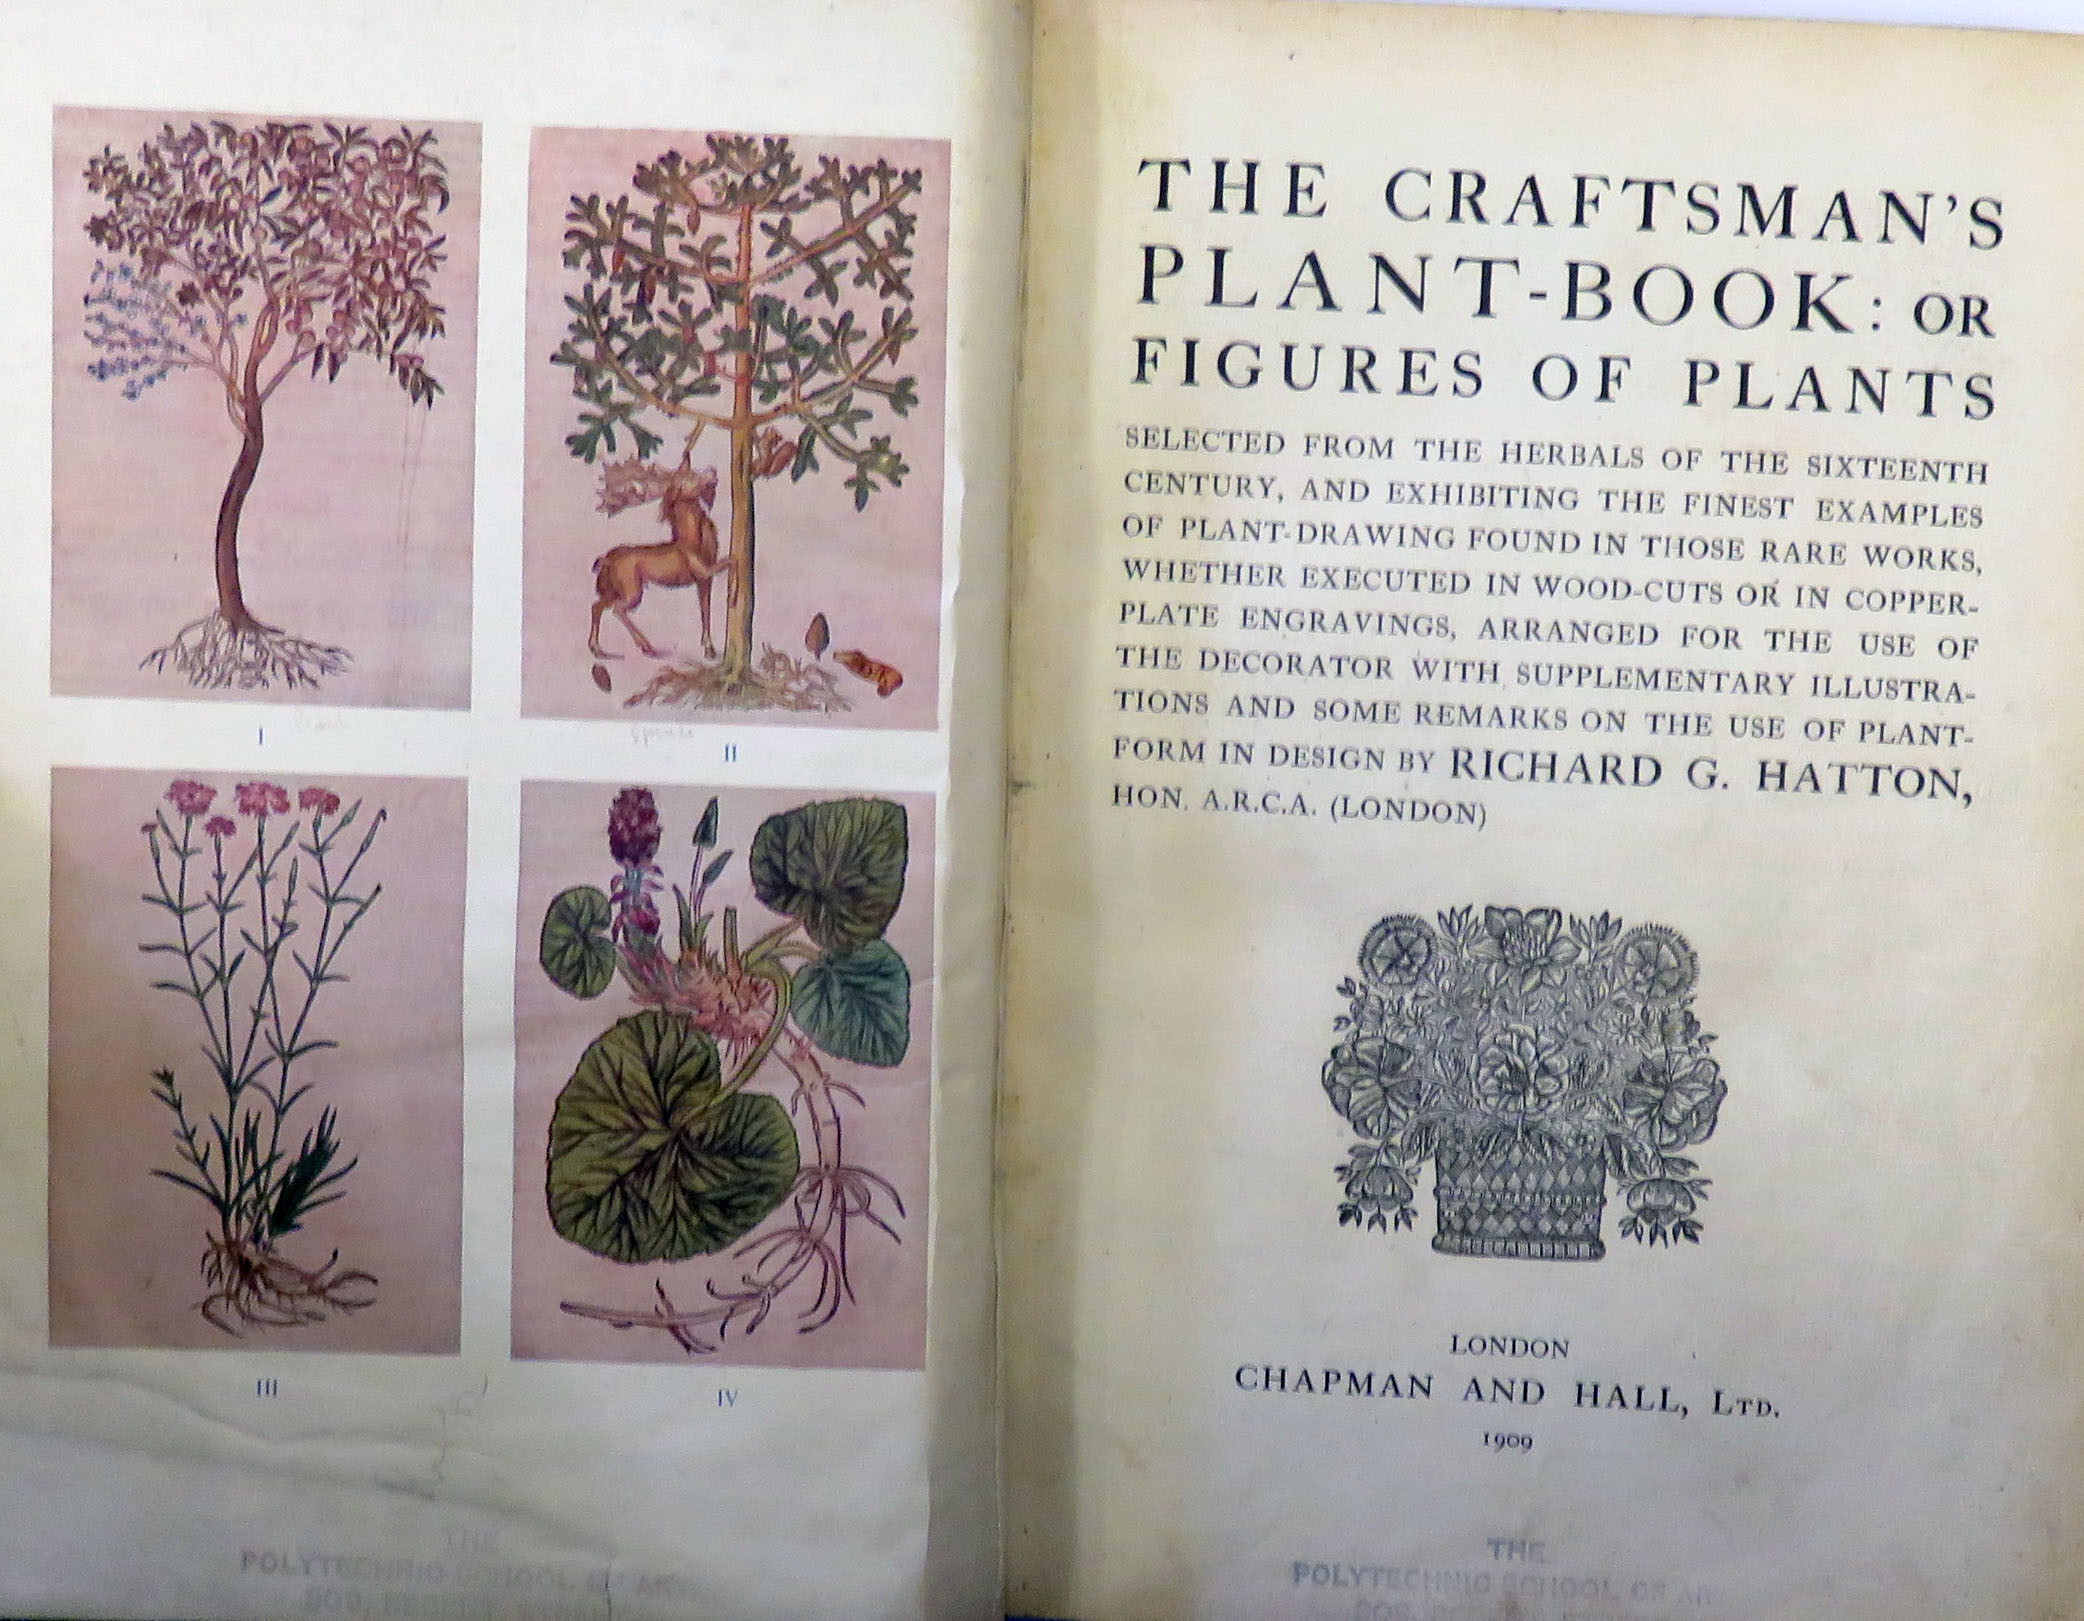 The Craftsman's Plant-Book: Or Figures of Plants